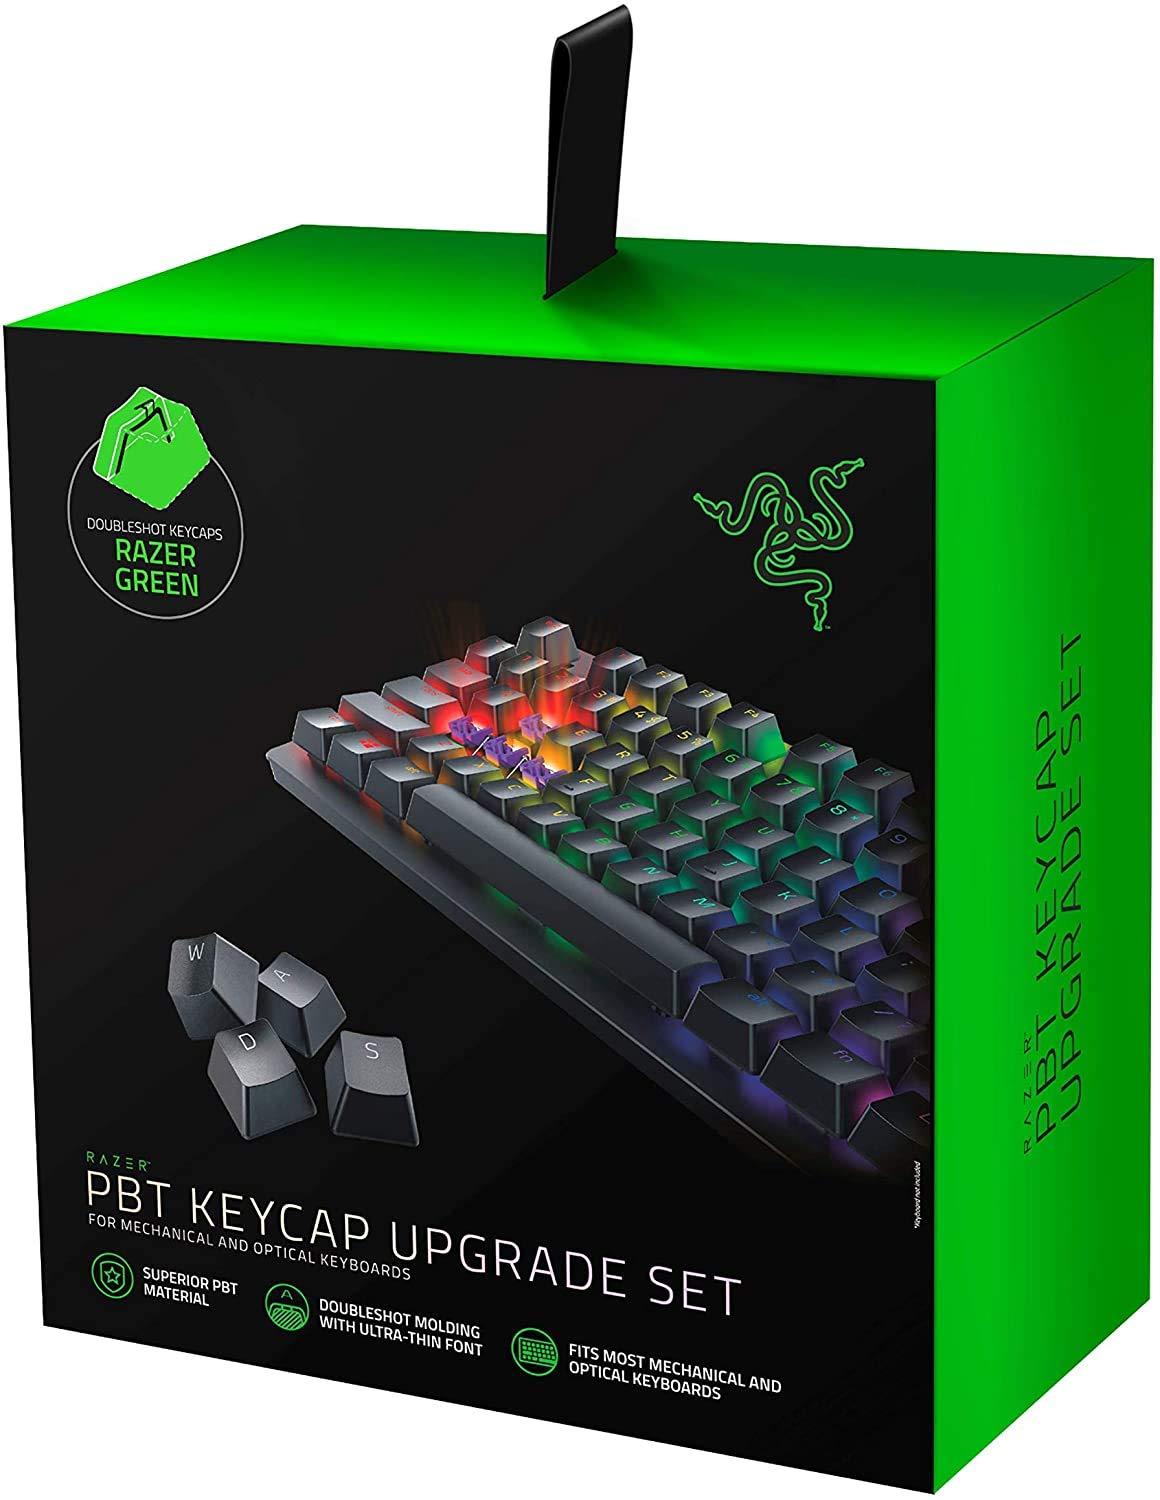 Razer Doubleshot PBT Keycap Upgrade Set for Mechanical and Optical Keyboards - Compatible with Standard 104/105 US and UK Layouts - Green -RC21-014904 - onBeli